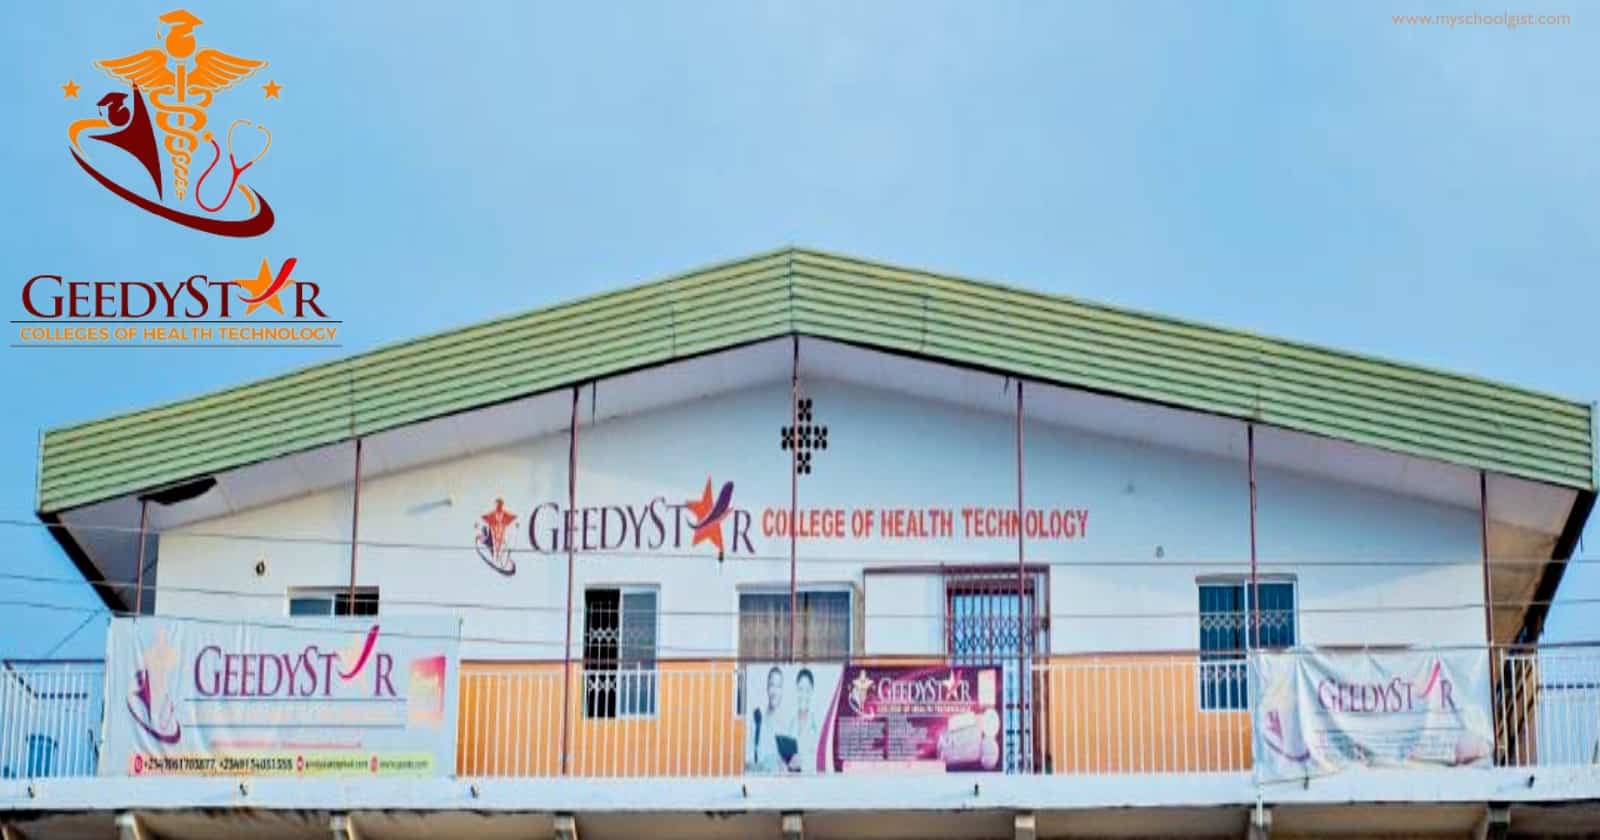 GeedyStar College of Health Technology admission form